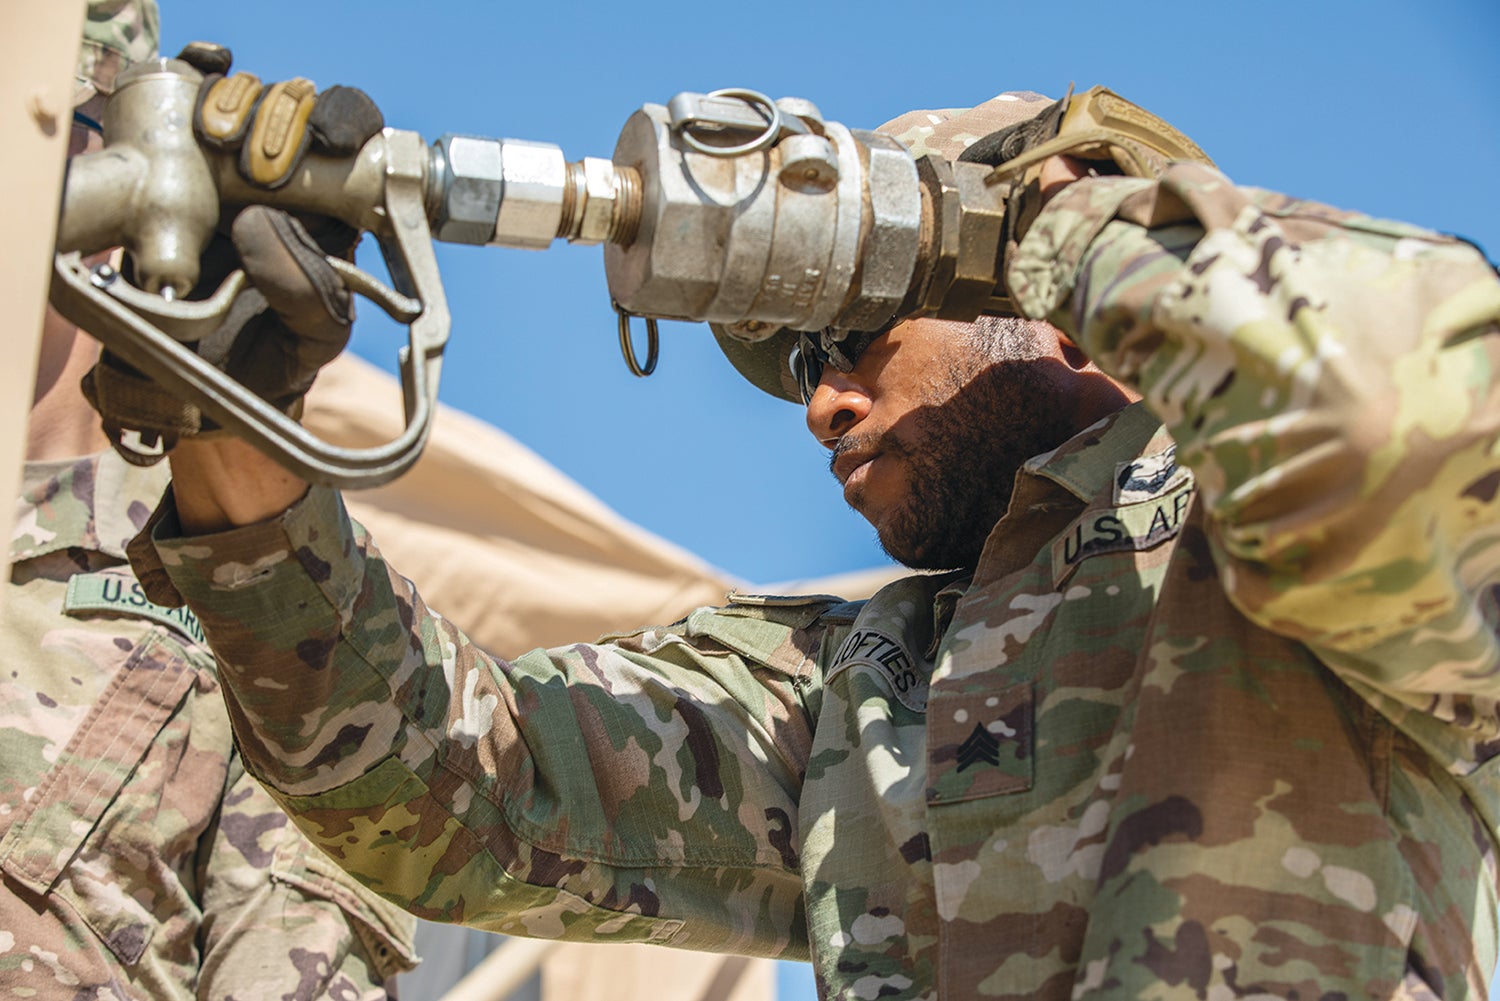 Sgt. Jermey Lofties, of the Tennessee National Guard’s 730th Quartermaster Company, operates a pump before a convoy exercise in Jordan. (Credit: Army National Guard/Sgt. Ryan Scribner)